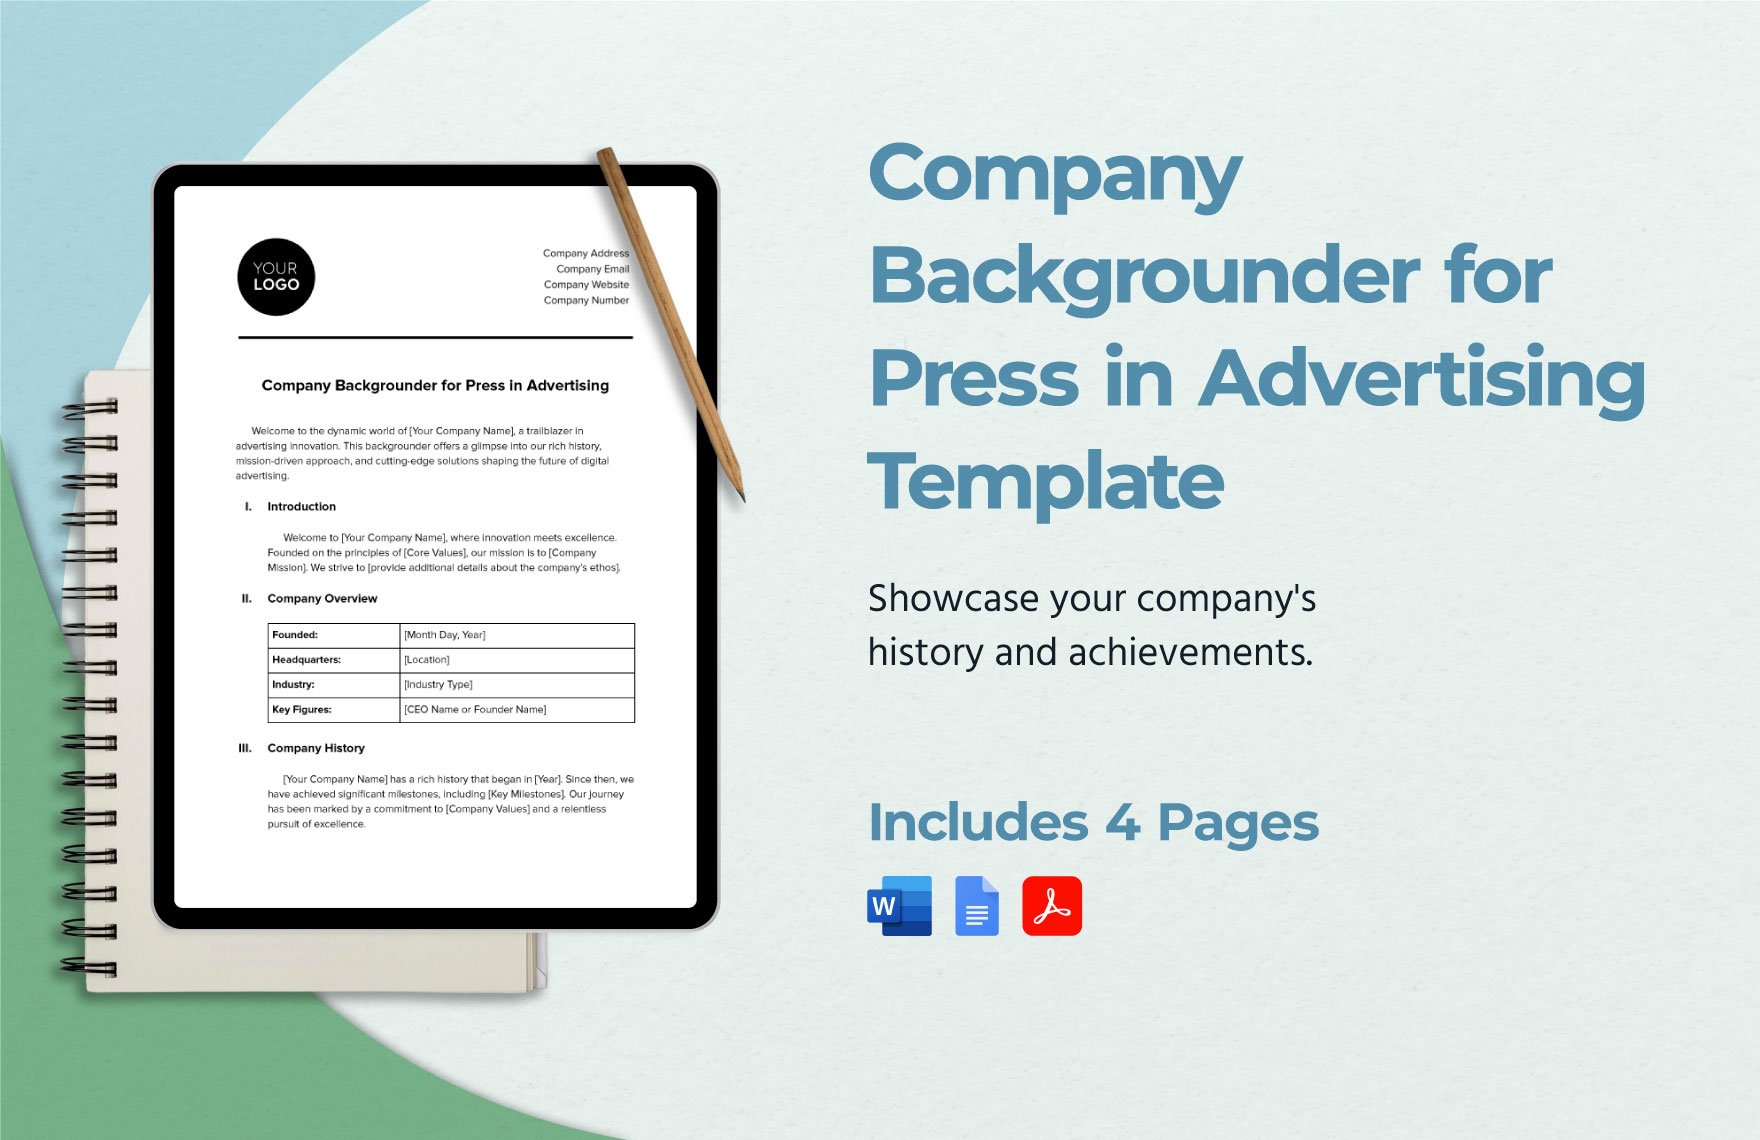 Company Backgrounder for Press in Advertising Template in Word, Google Docs, PDF